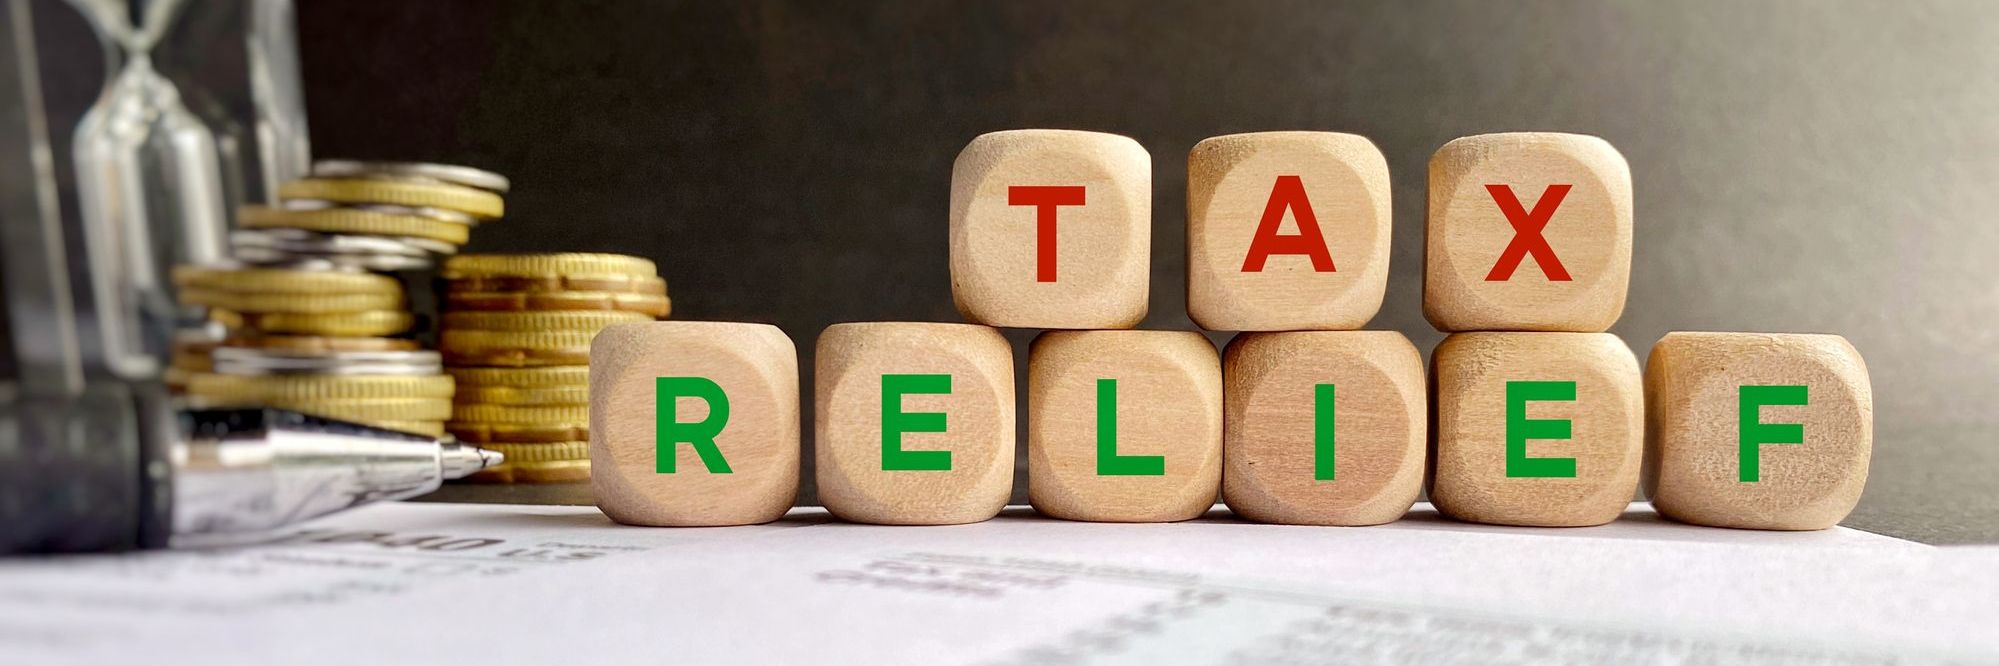 R&D Tax Relief - Latest Key Issues including the New ‘Single’ Scheme 